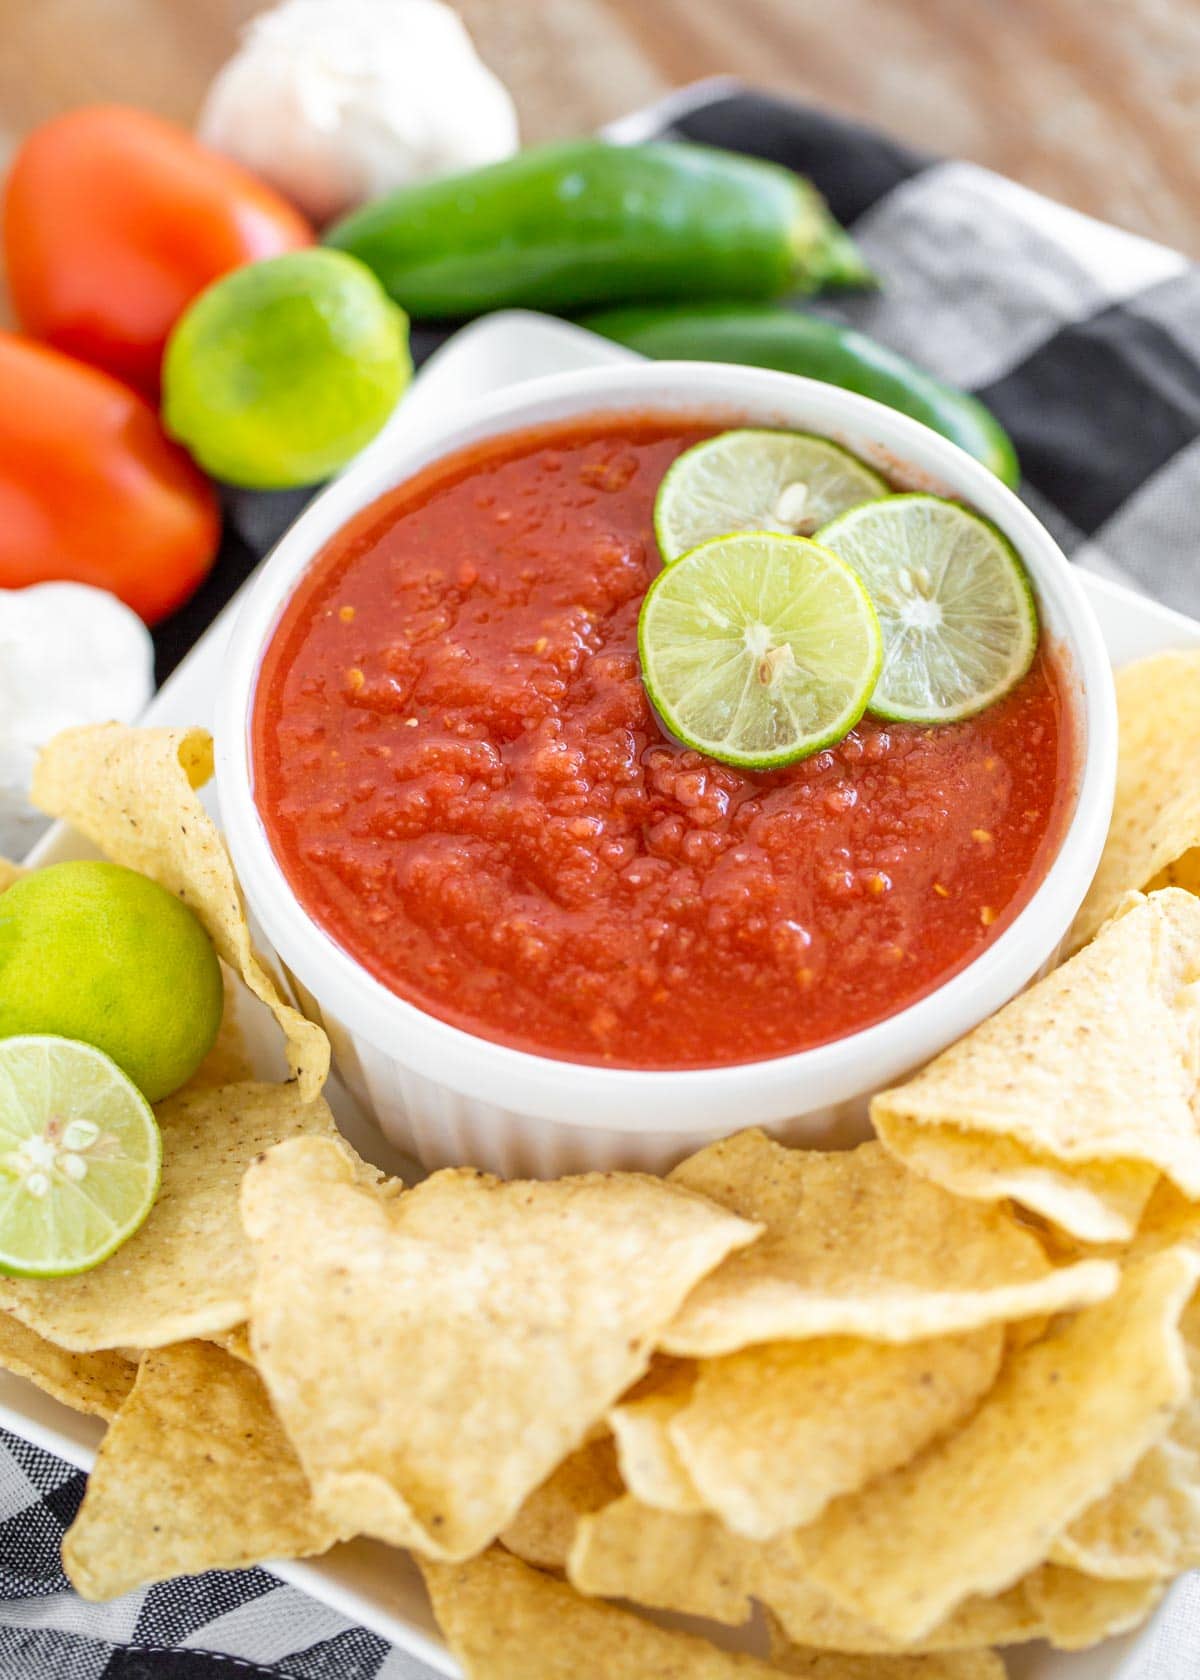 Chili's copycat salsa served on a platte with tortilla chips